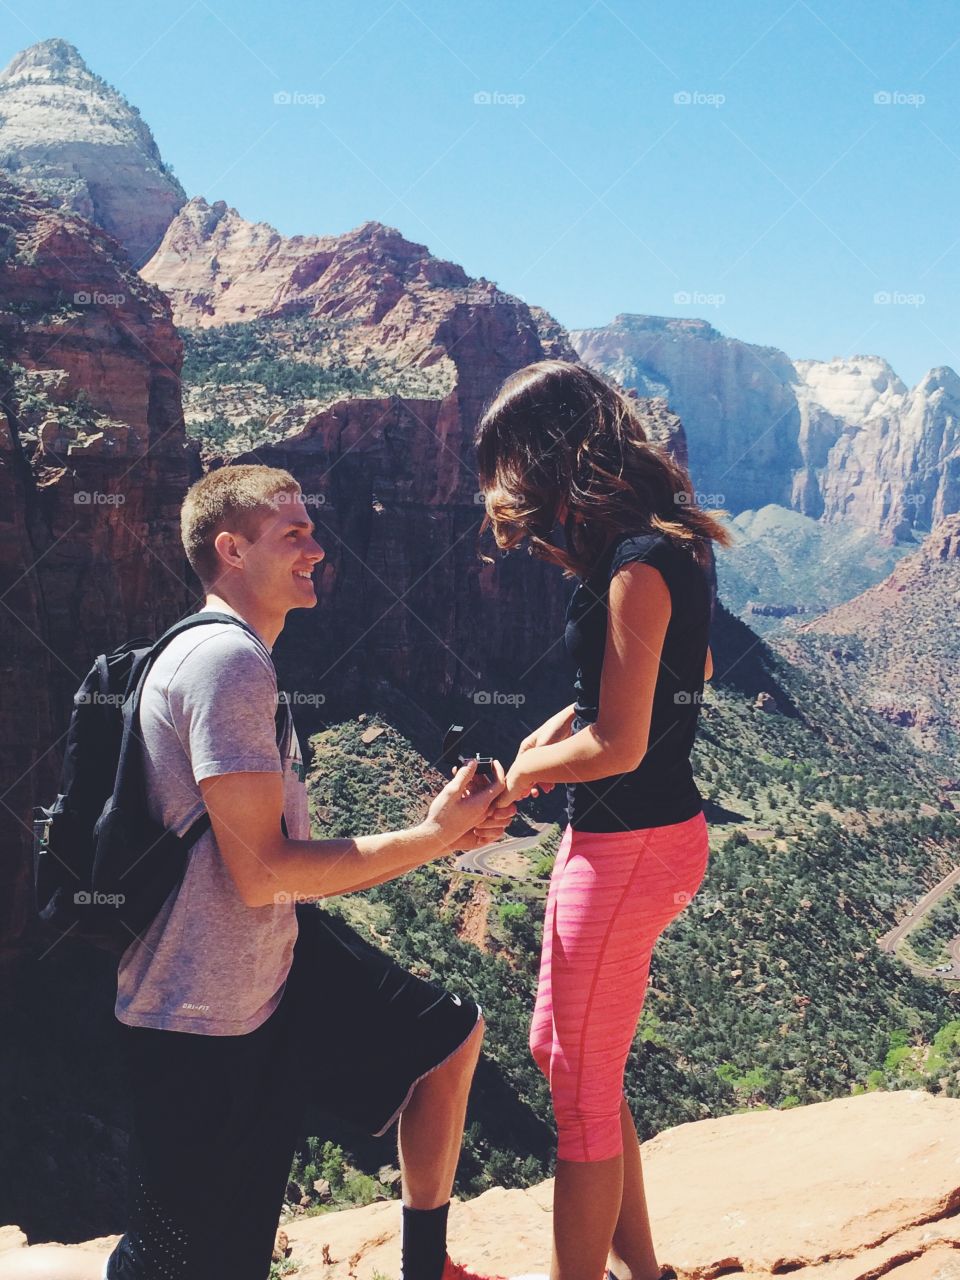 Proposal in Zion National Park 